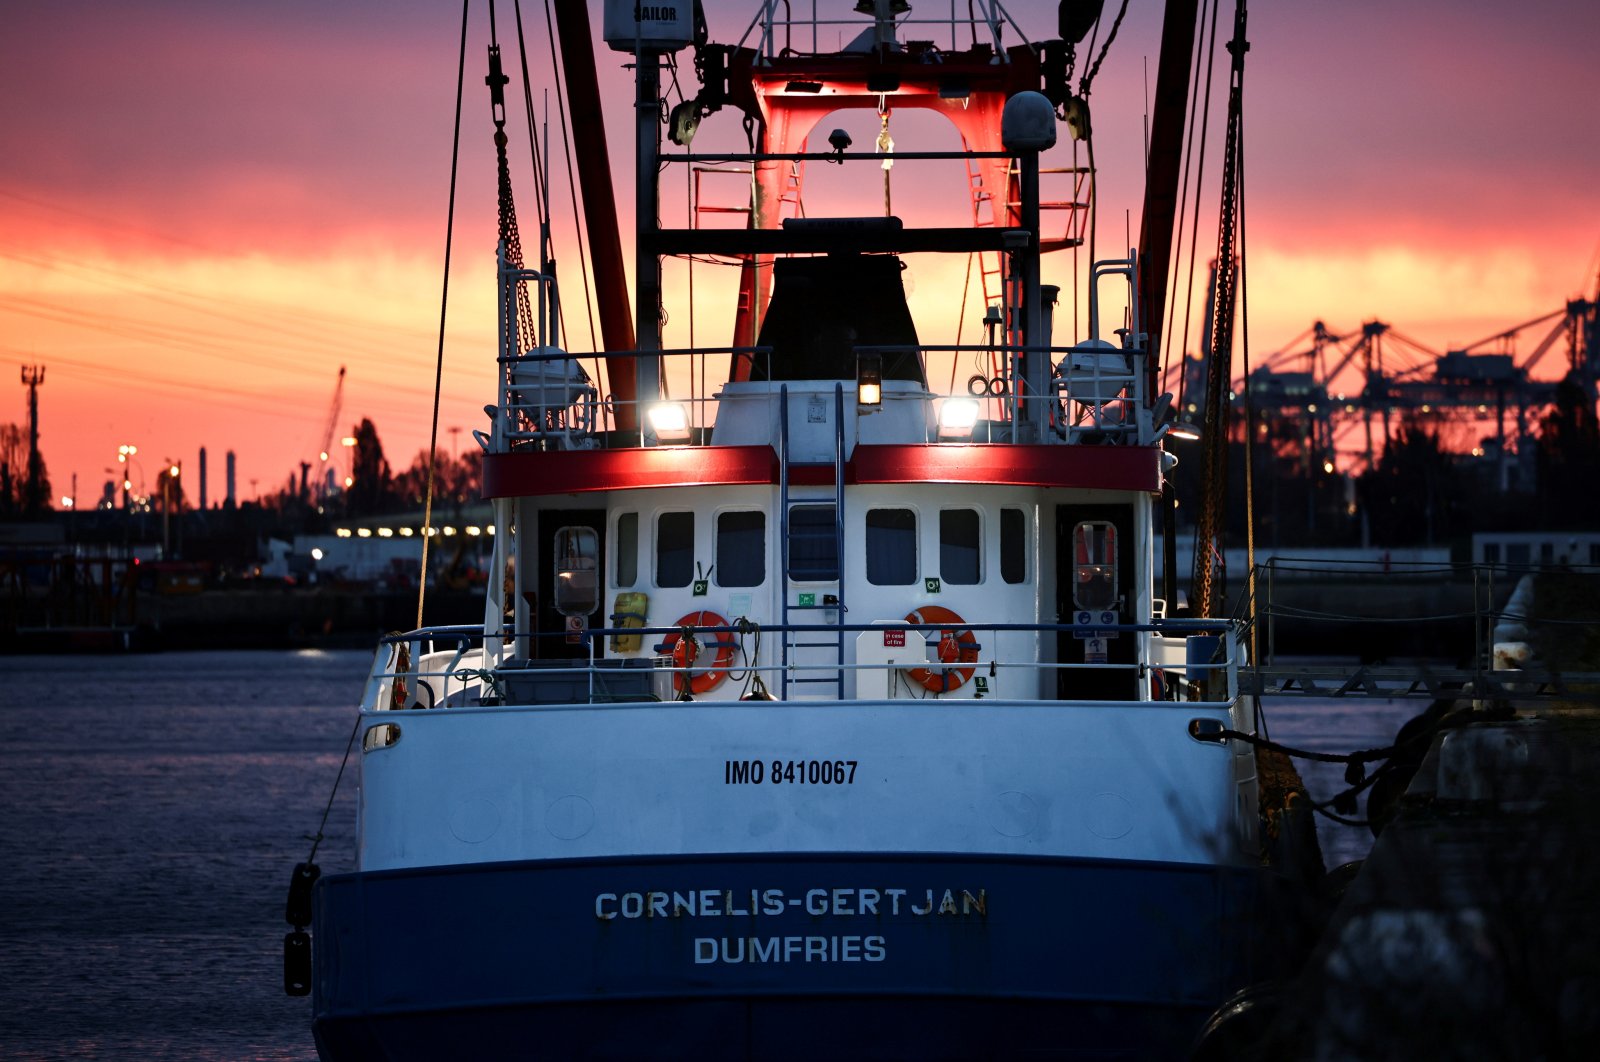 A British trawler Cornelis Gert Jan is seen moored in the port of Le Havre, after France seized on Thursday a British trawler fishing in its territorial waters without a license, in Le Havre, France, Oct. 29, 2021. (Reuters Photo)